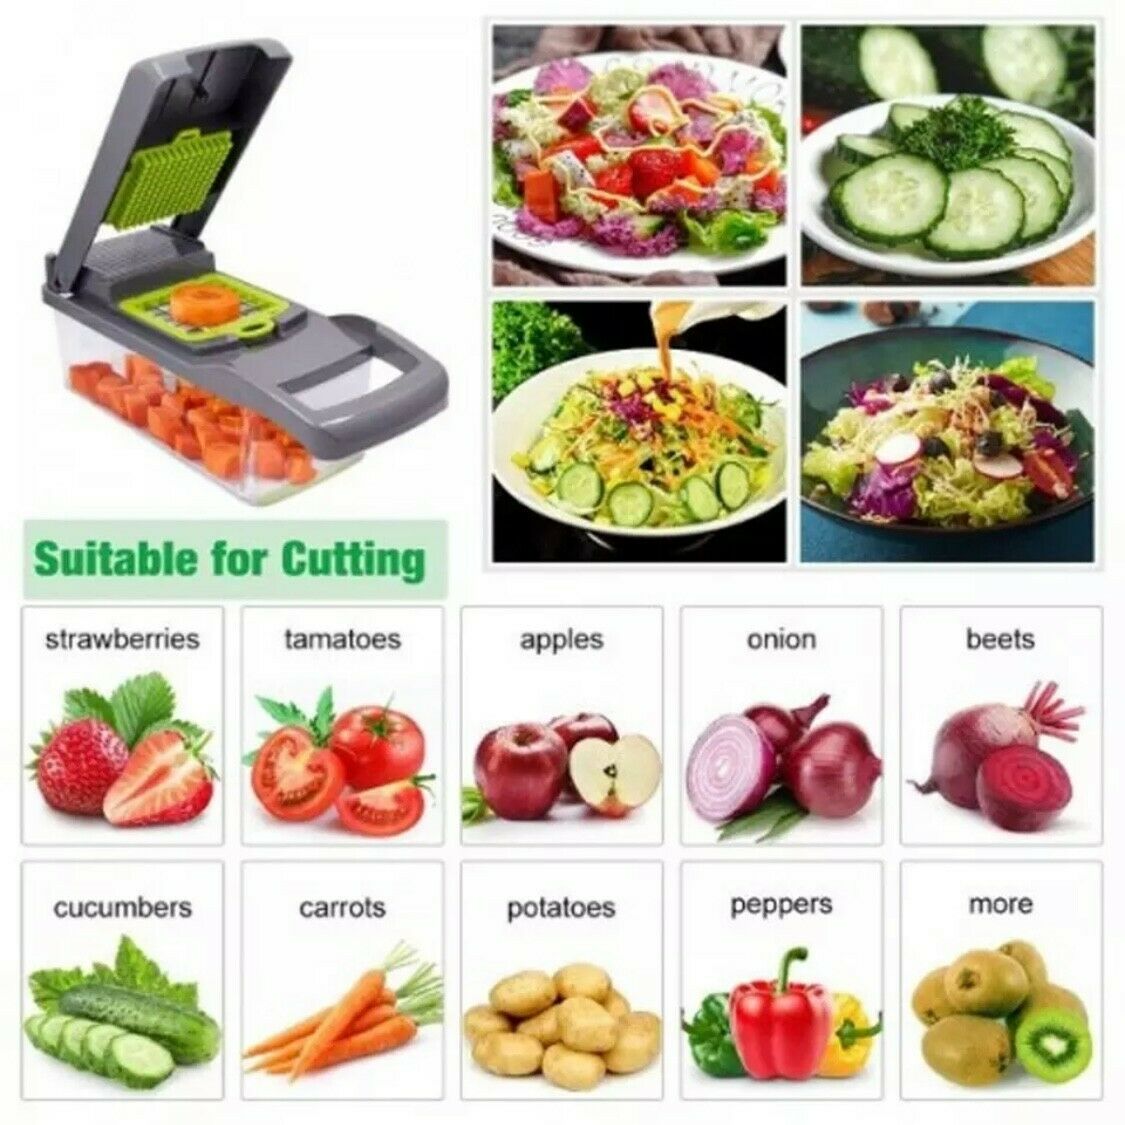 15 in 1 Vegetable Chopper, Multifunctional Vegetable Slicer Dicer Chopper,  Fruit and Vegetable Chopper with Container, Onion Chopper with 8 Blades